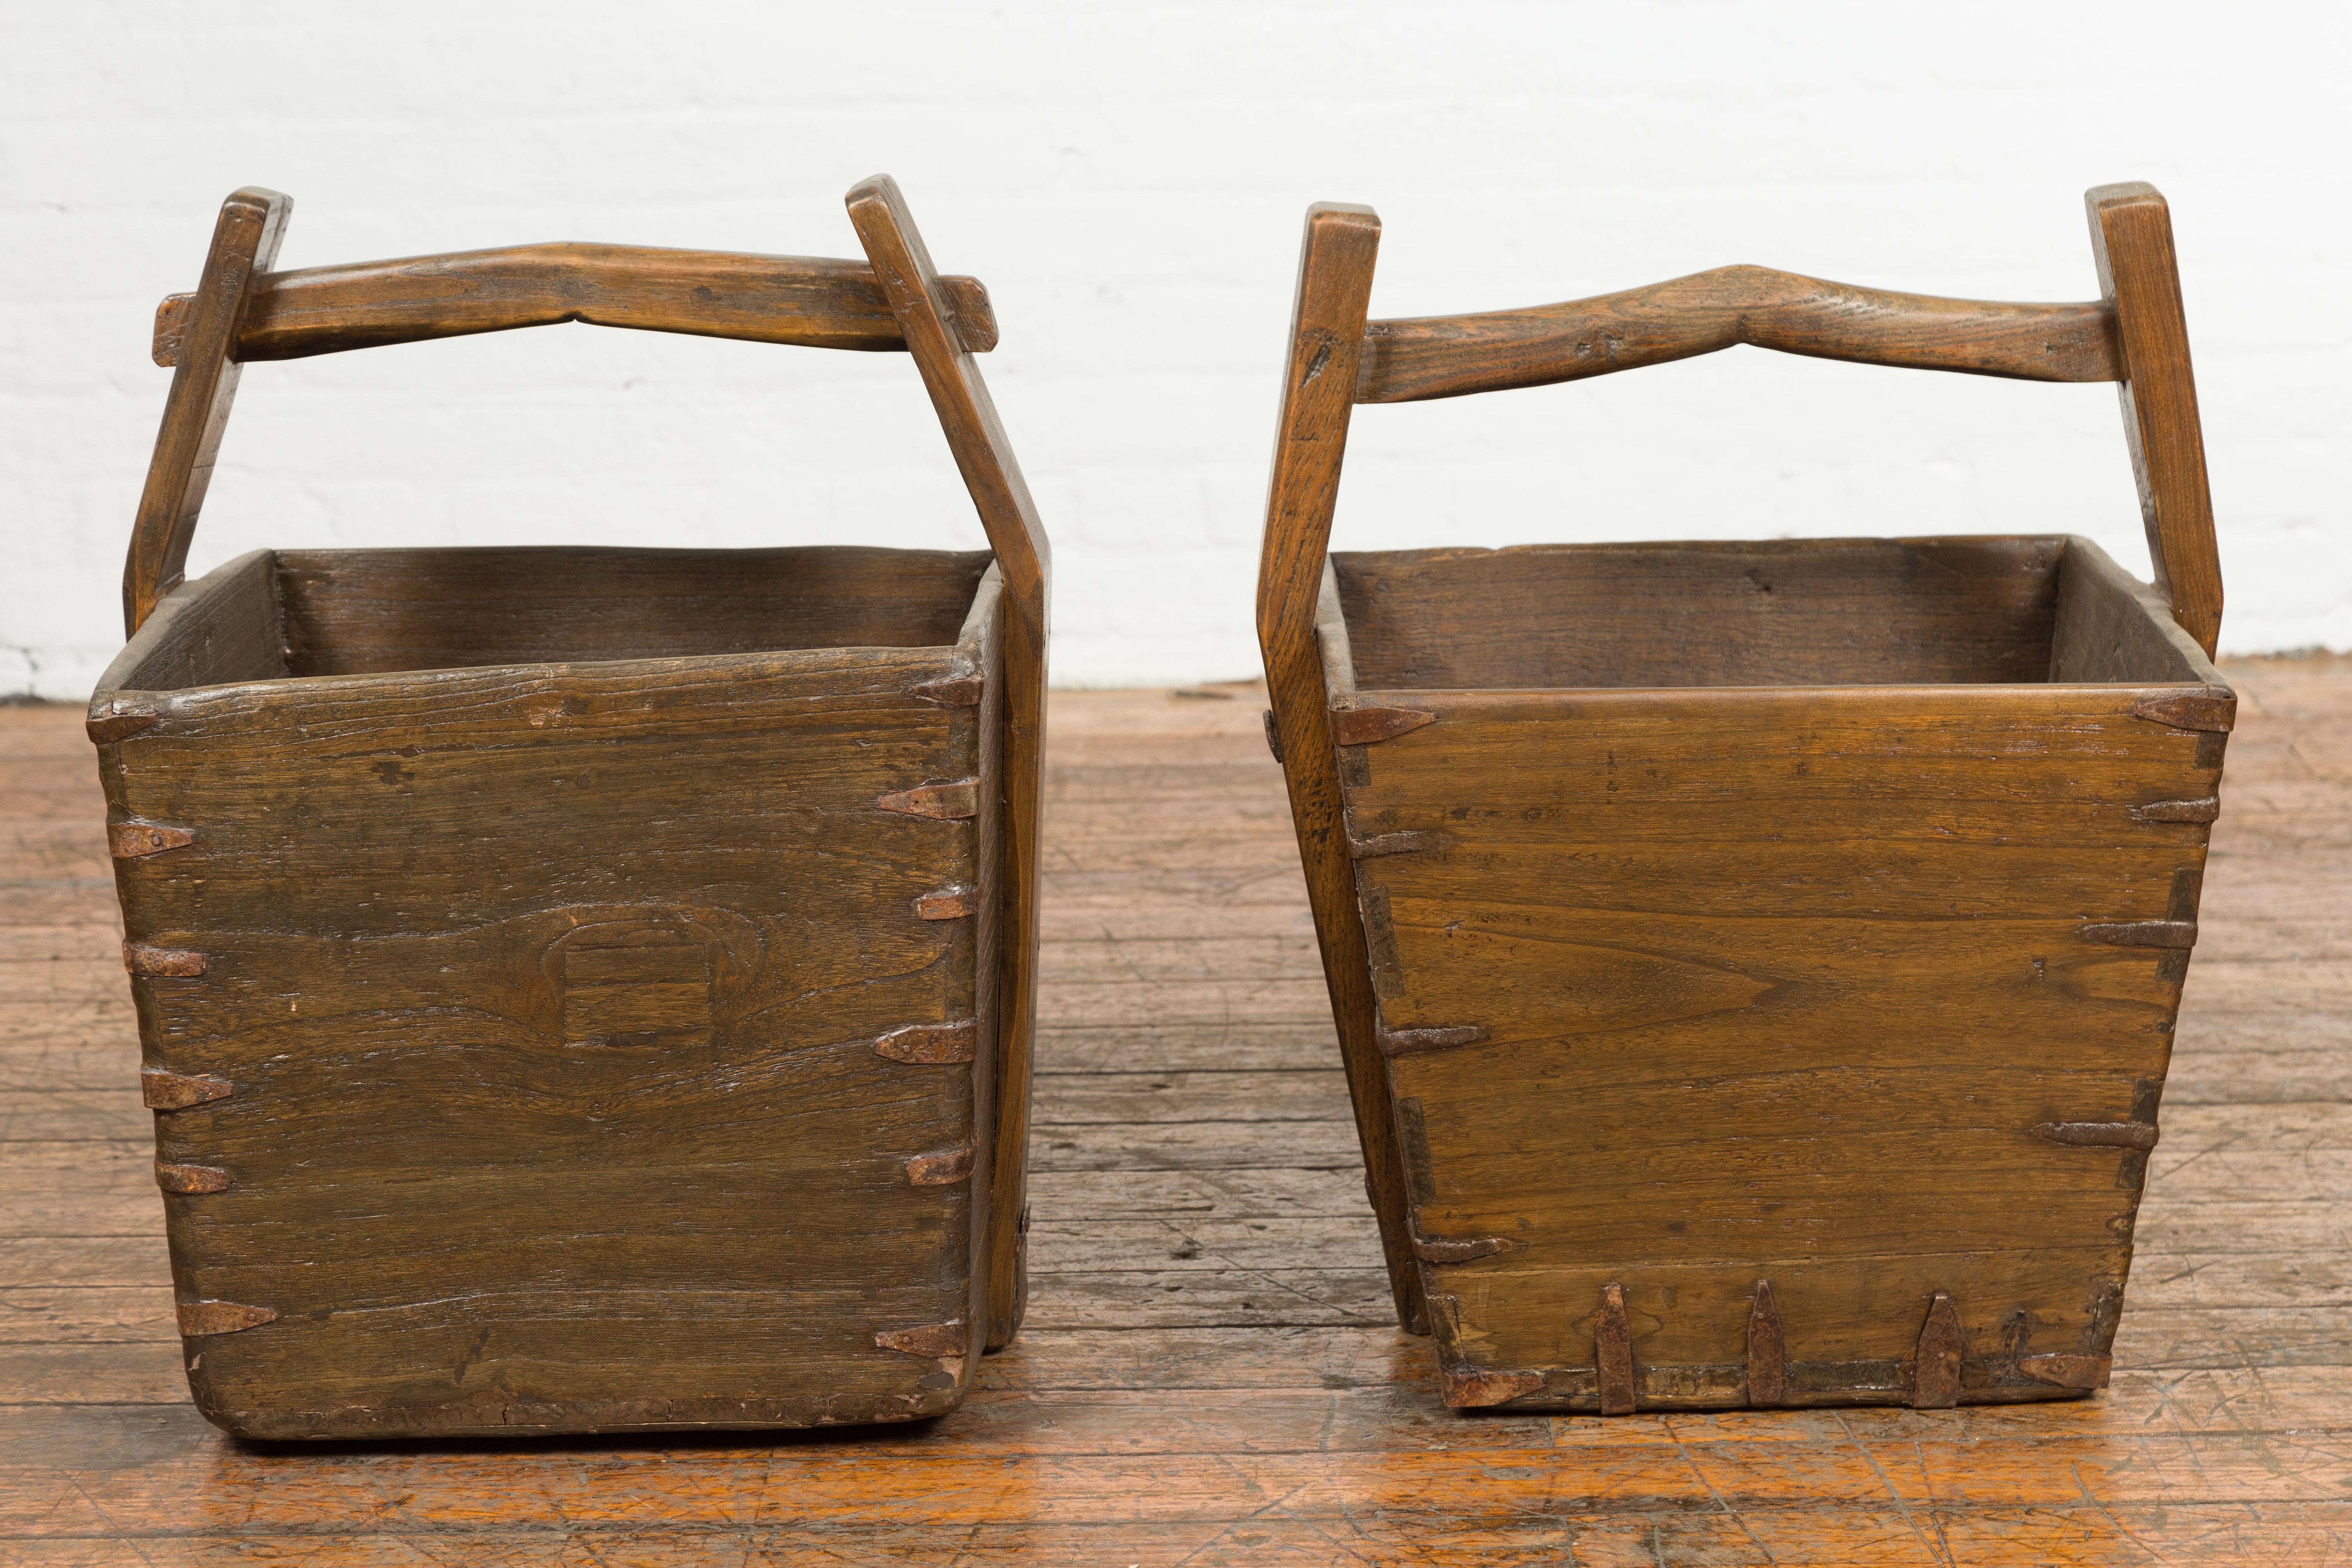 19th Century Antique Chinese Wood and Metal Grain Baskets with Carrying Handles, Sold Each For Sale